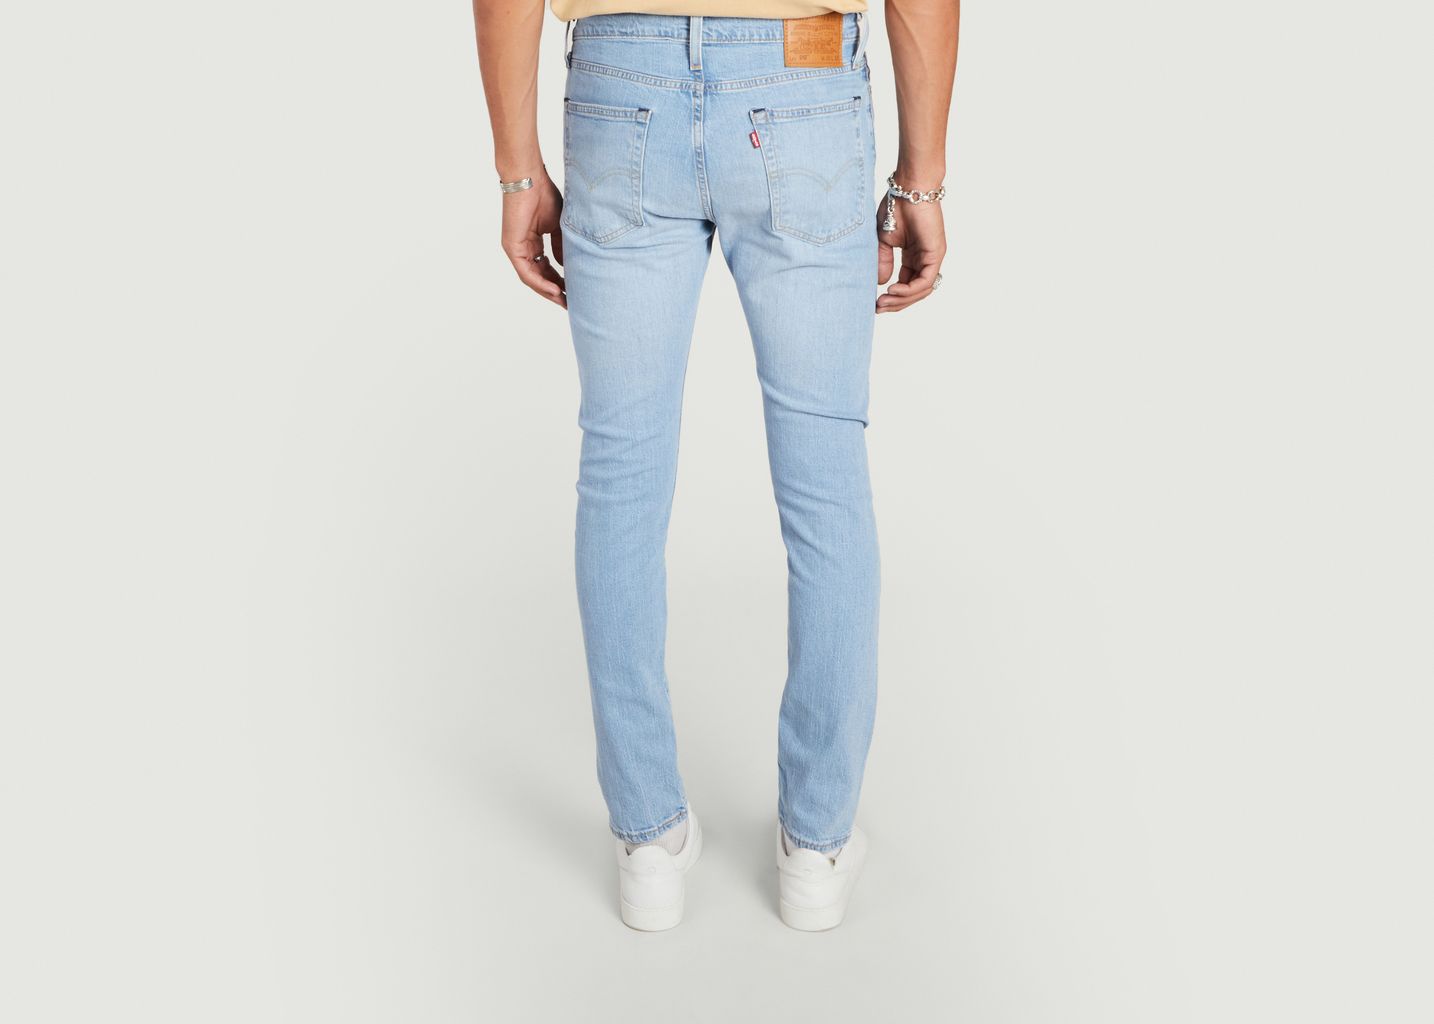 Skinny 510 cotton and elastane jeans - Levi's Red Tab